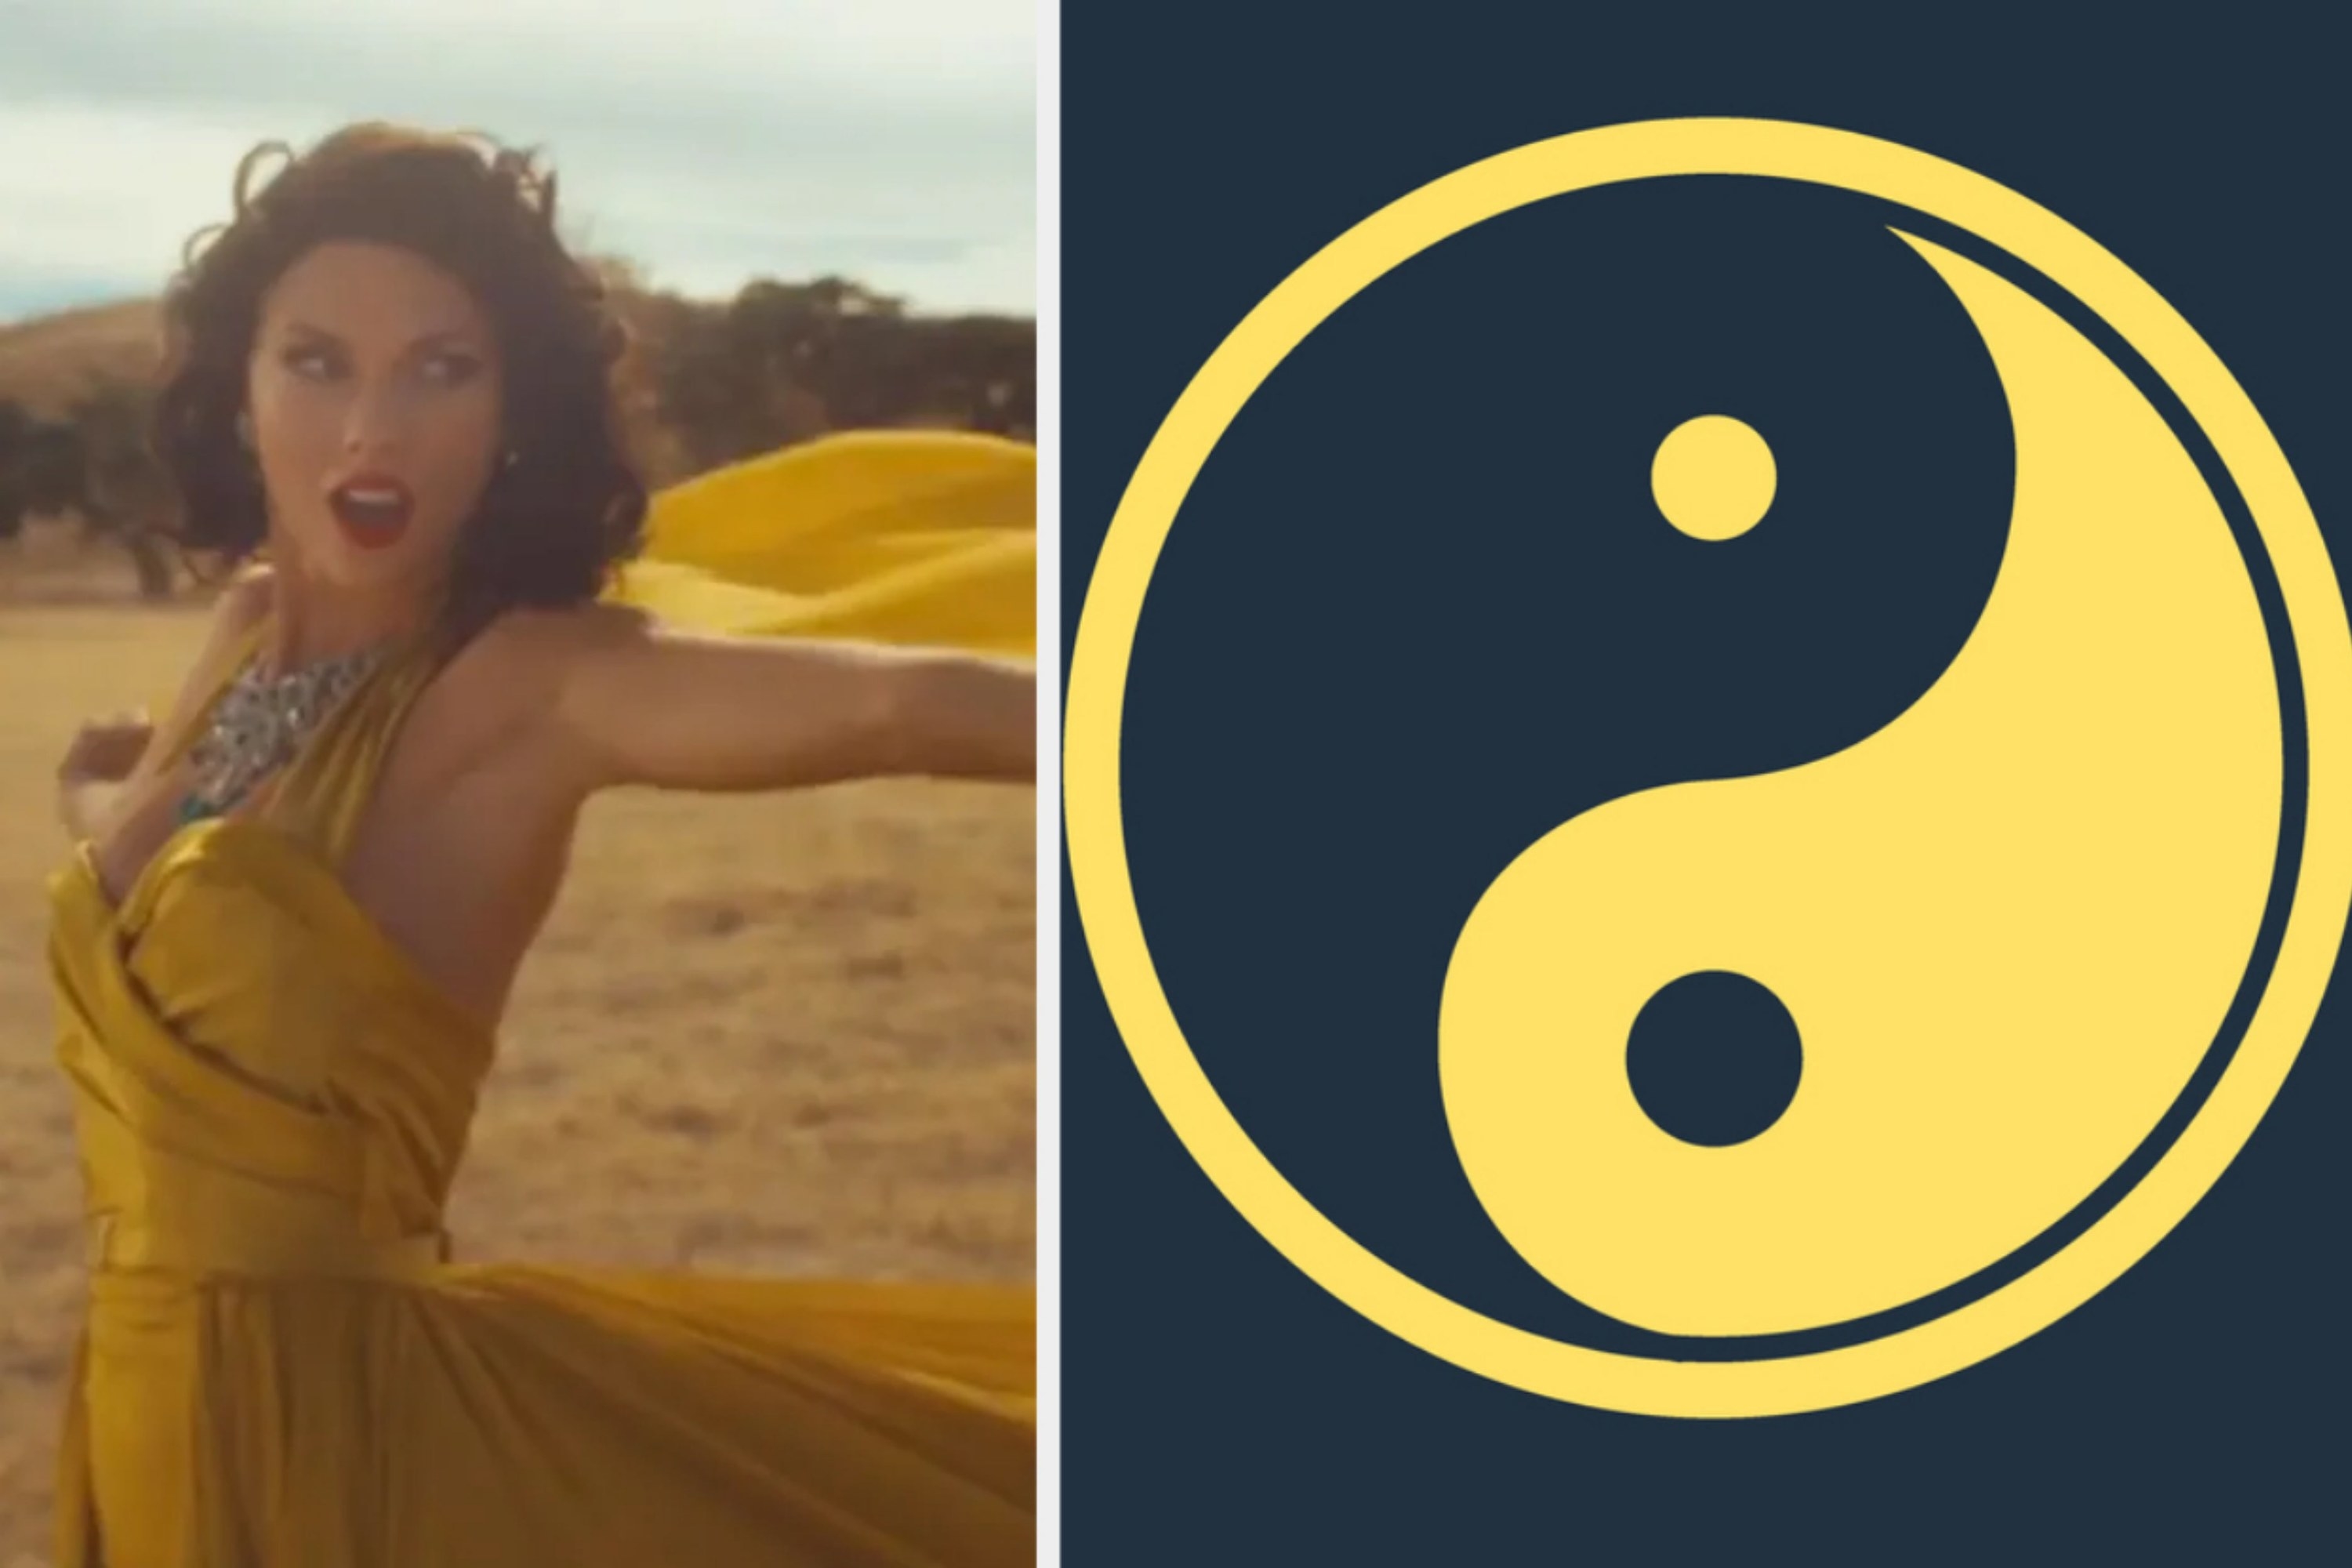 two photos; on the left, a photo of Taylor Swift in the &quot;Wildest Dreams&quot; music video on the right, a stock image of a ying yang sign